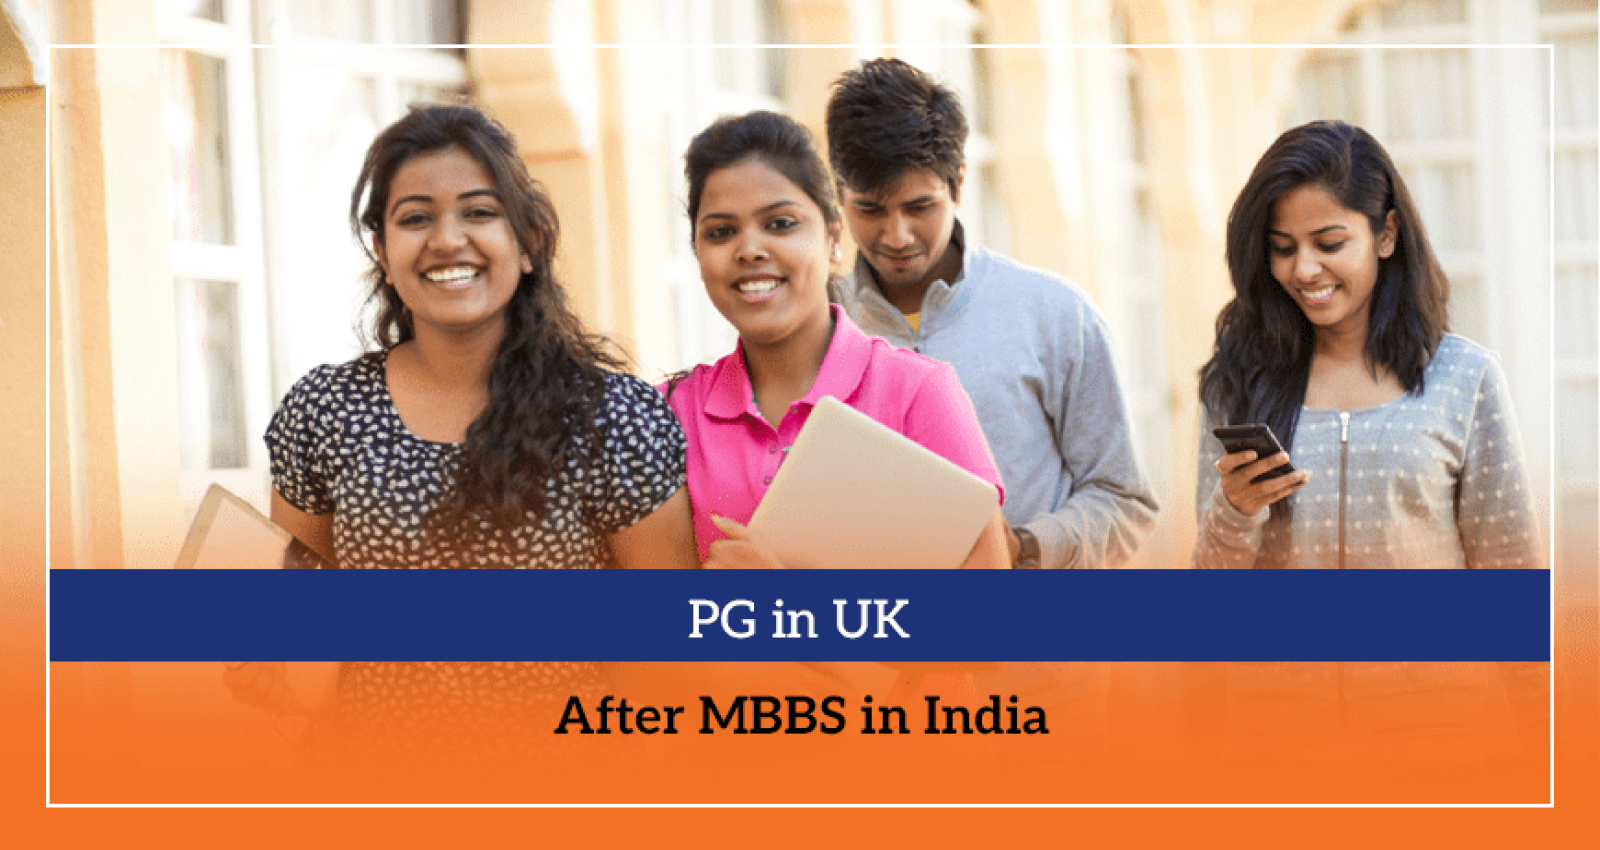 PG in UK After MBBS in India